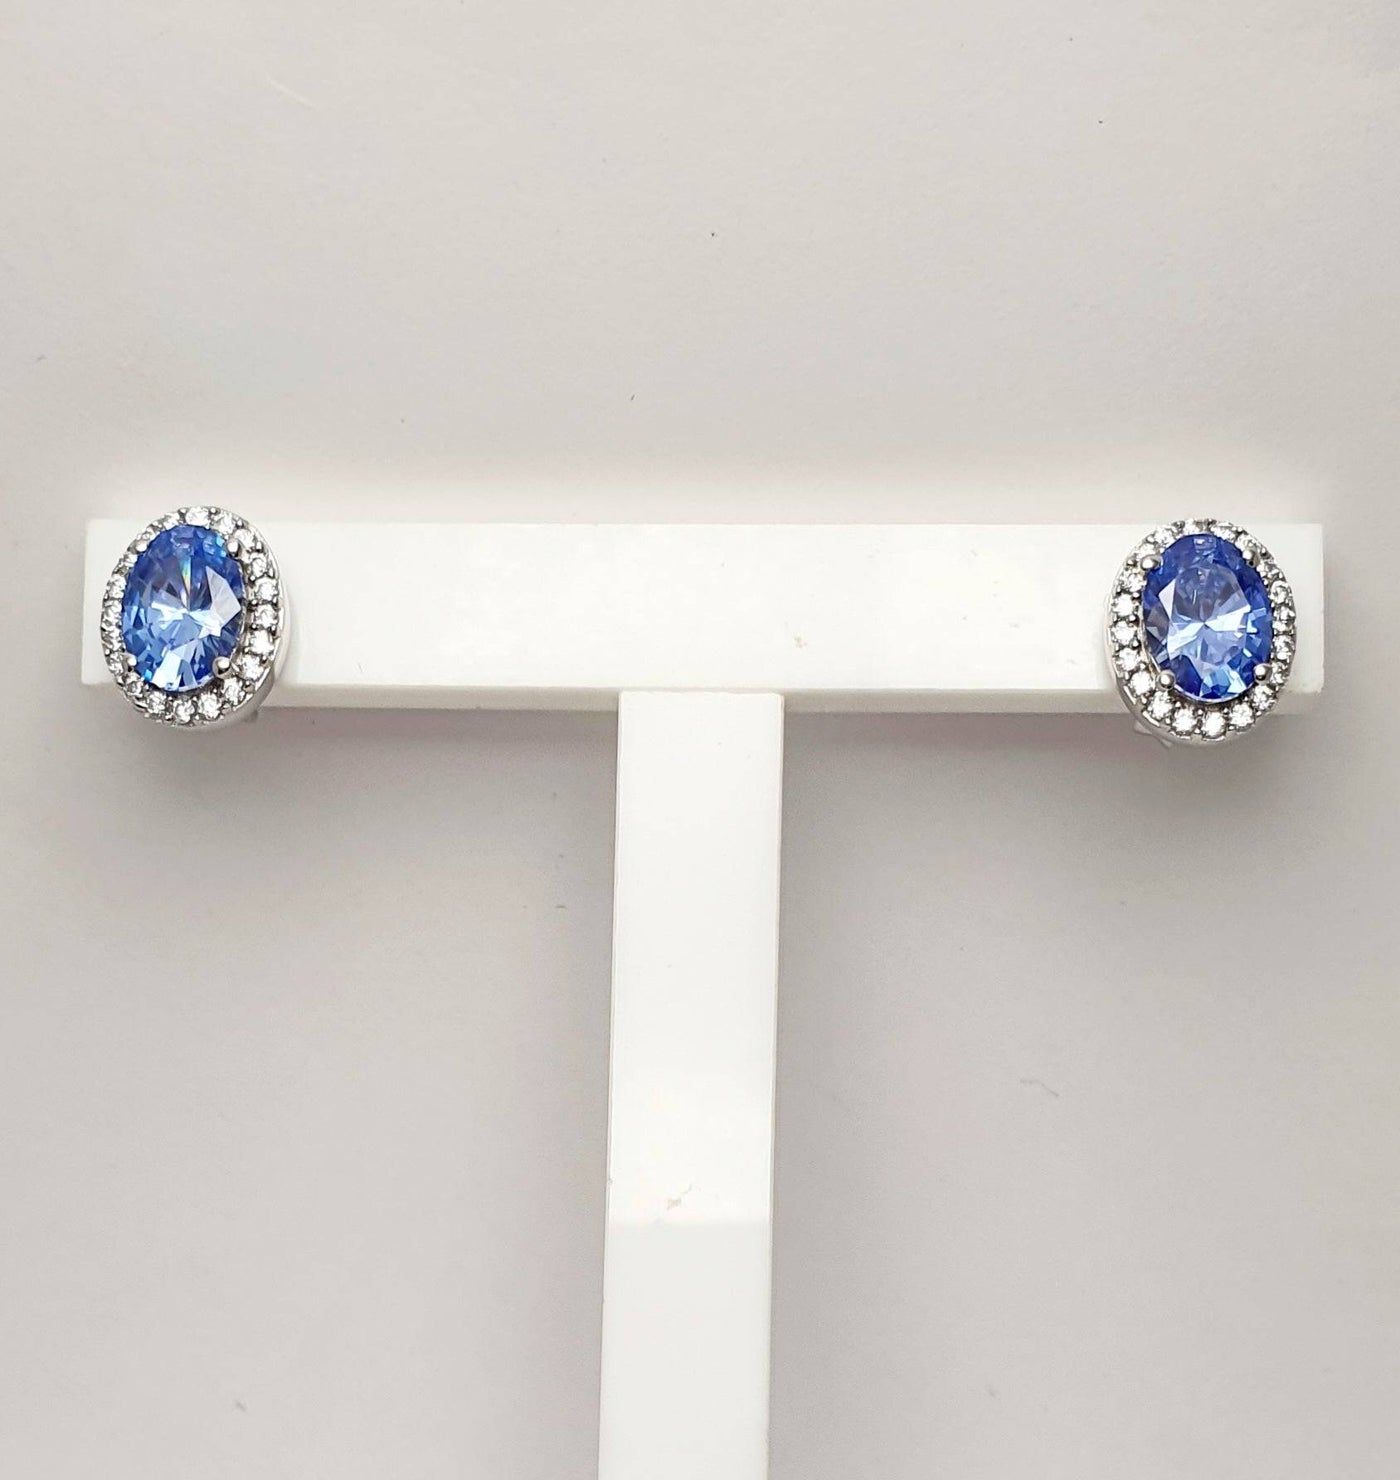 Sterling Silver Fancy Blue Oval Cubic Zirconia Earrings with White CZ Surround